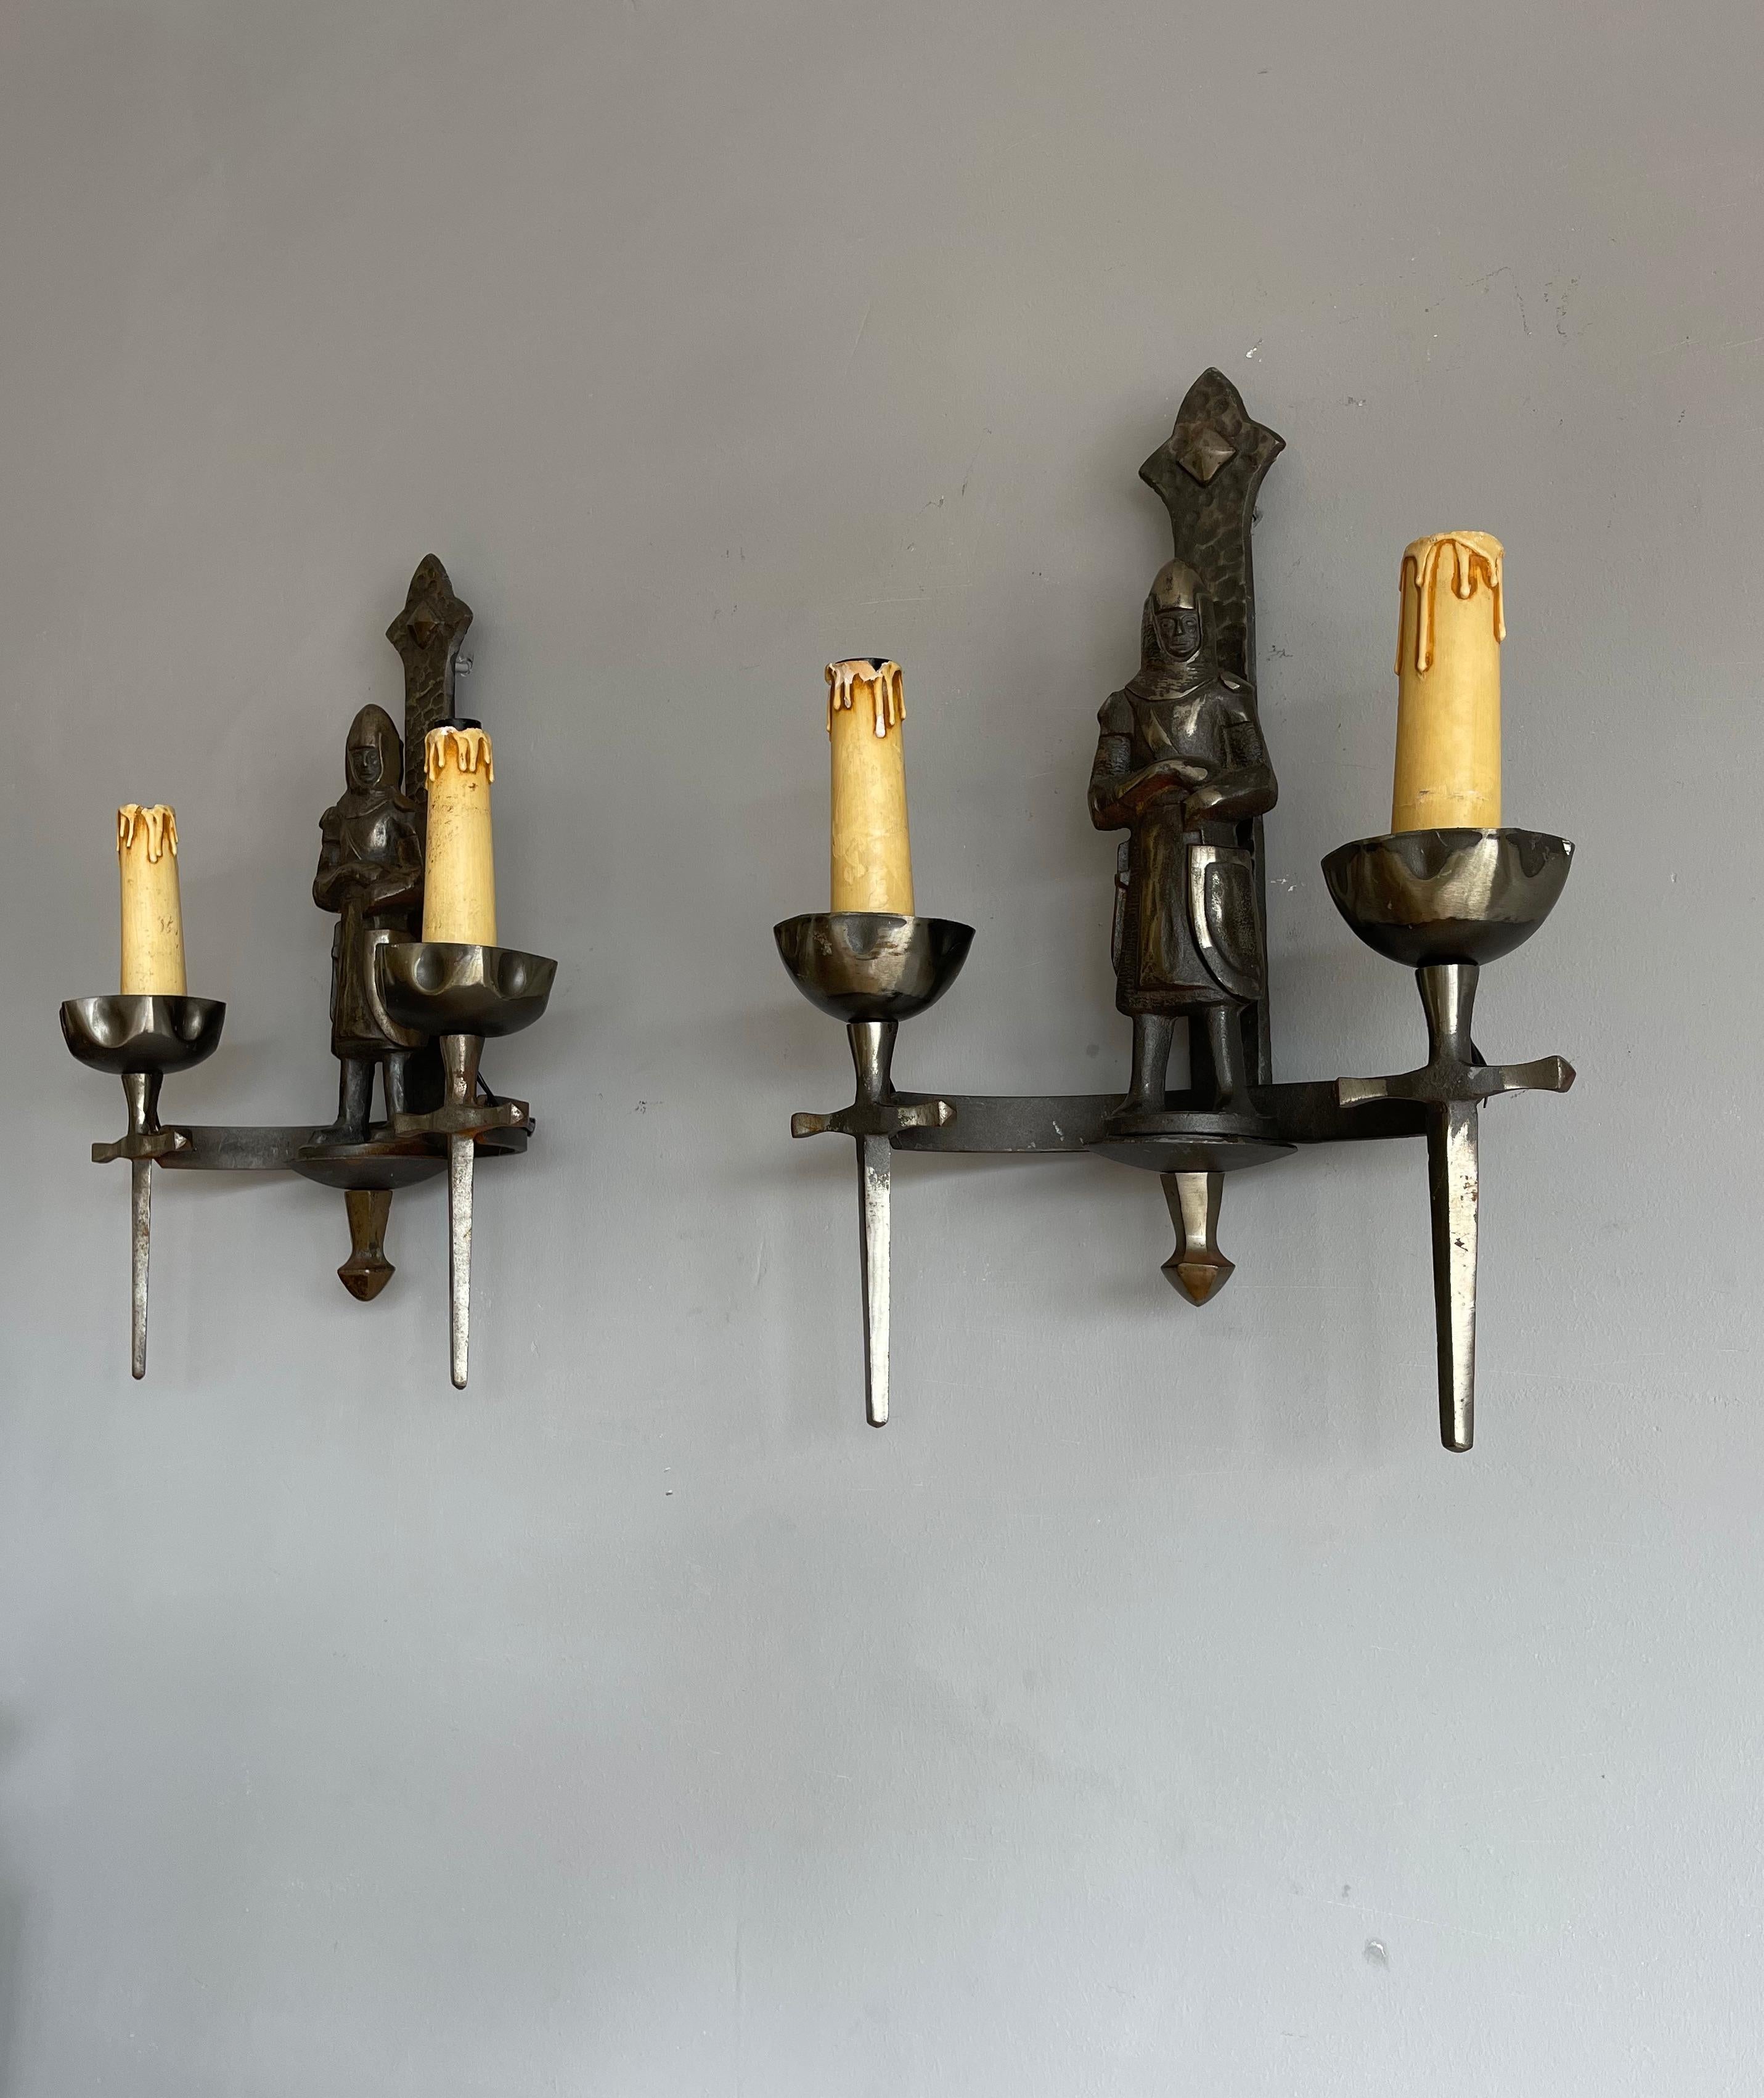 Rare Pair of Two-Light Gothic Revival Bronzed Knight with Swords Wall Sconces 6